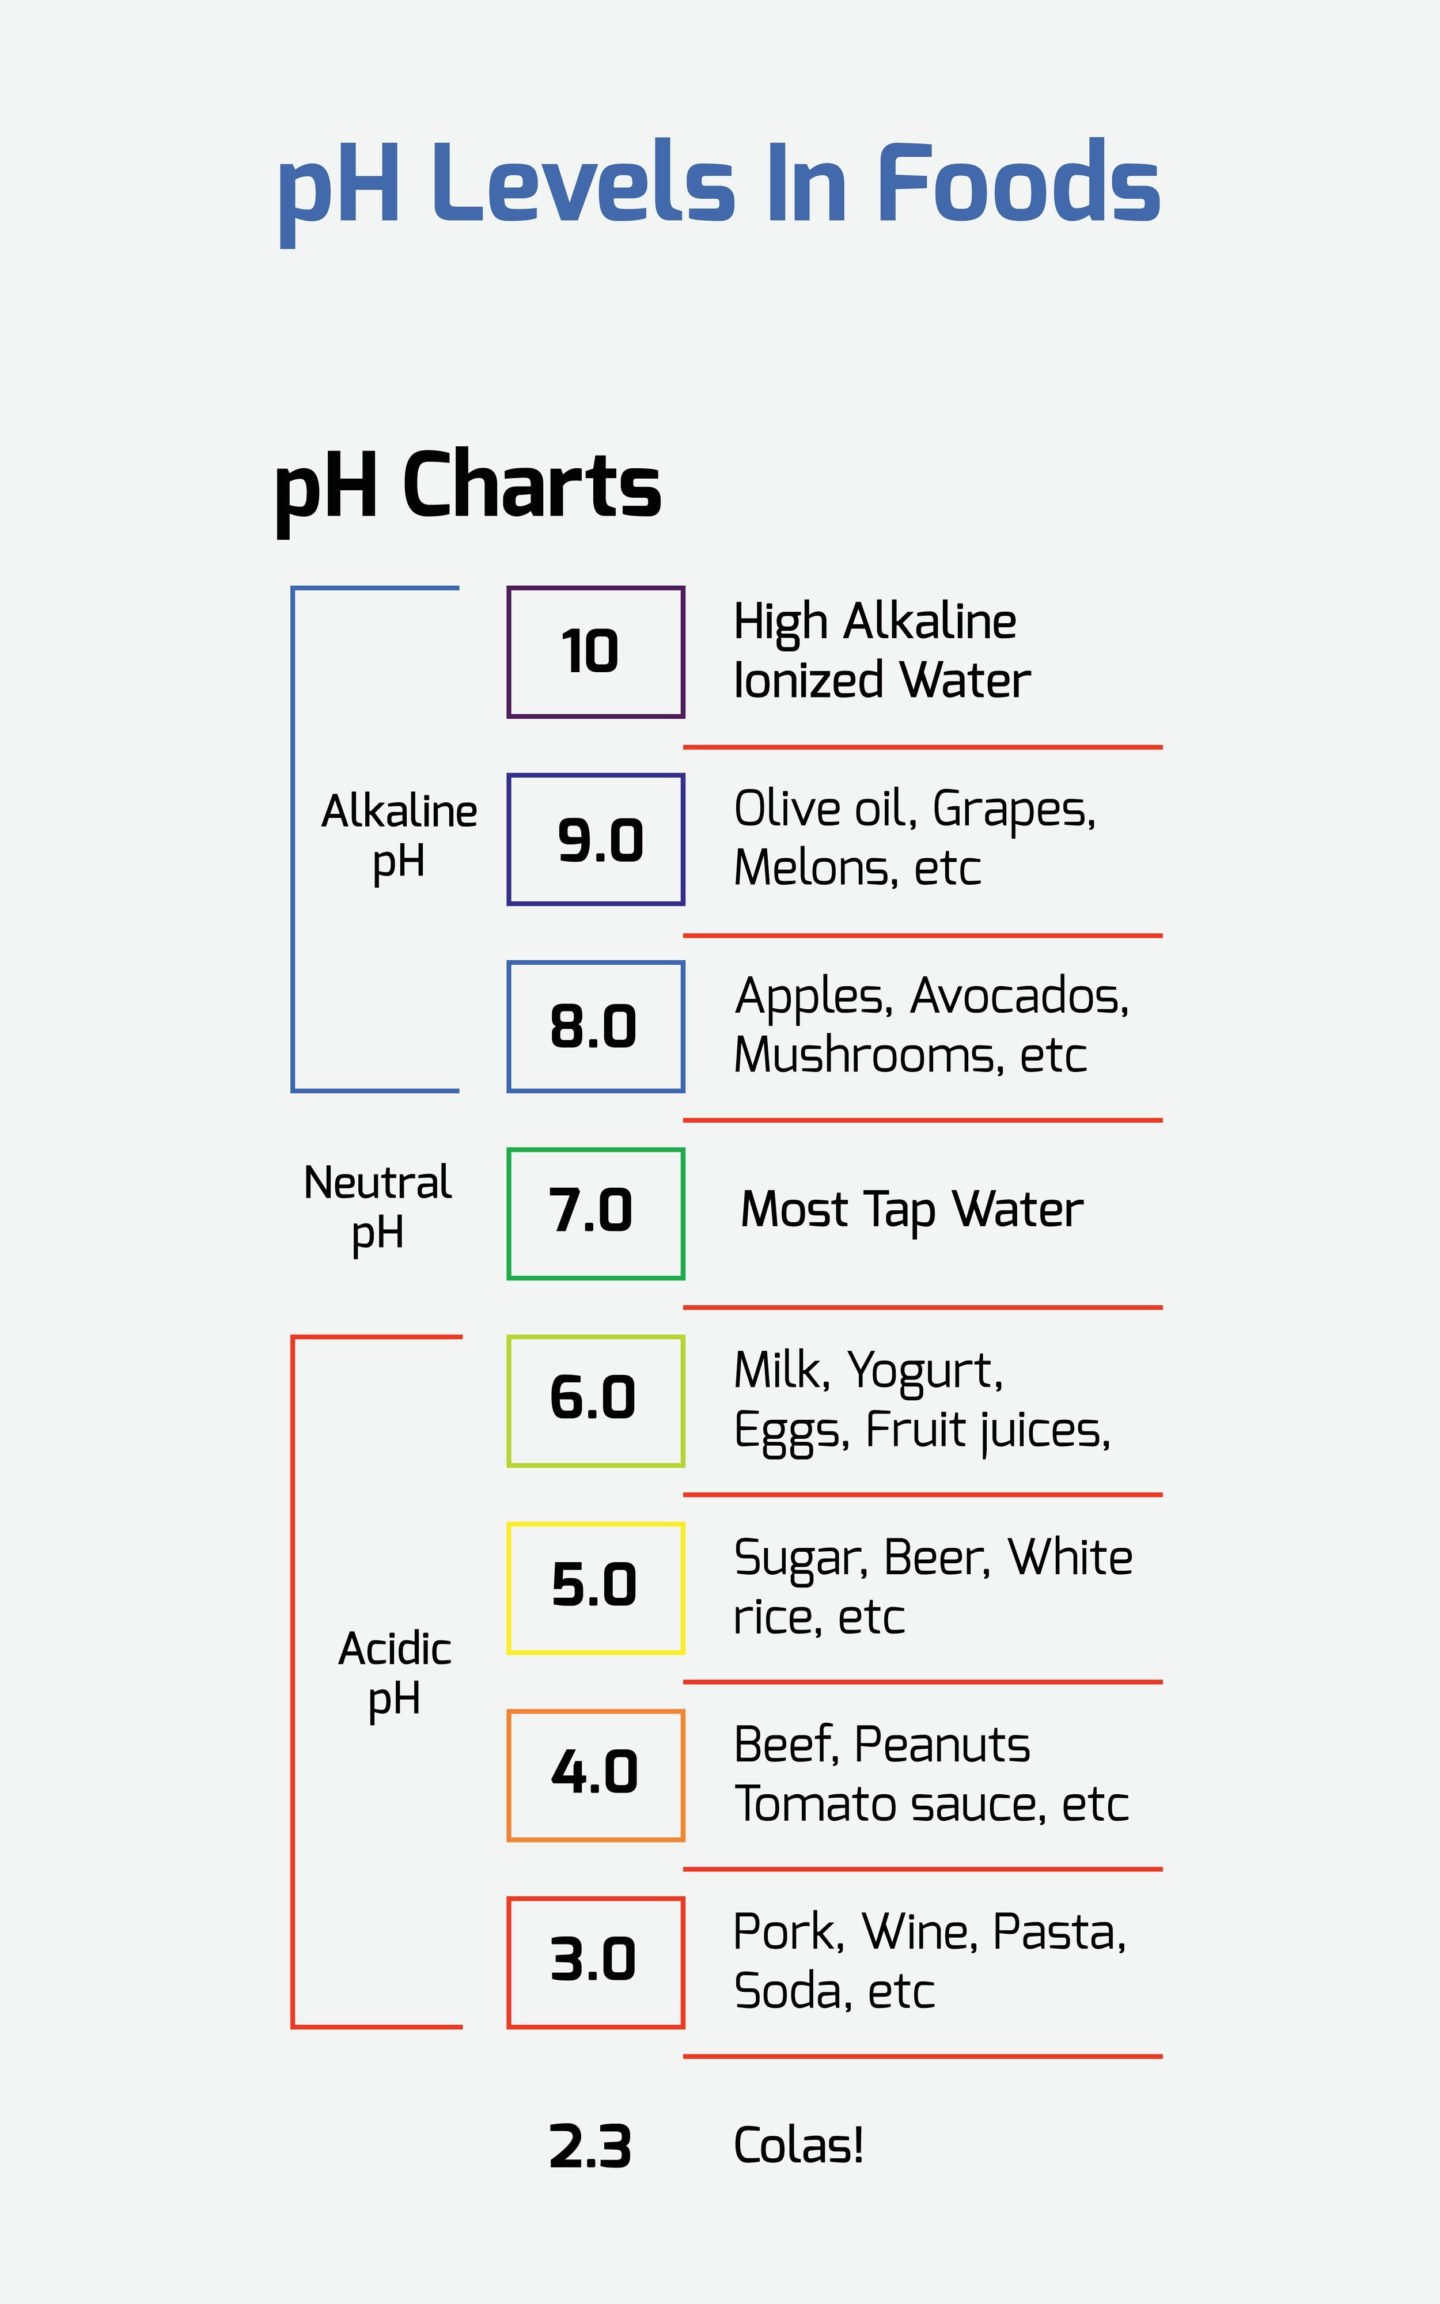 Ph Levels Of Foods